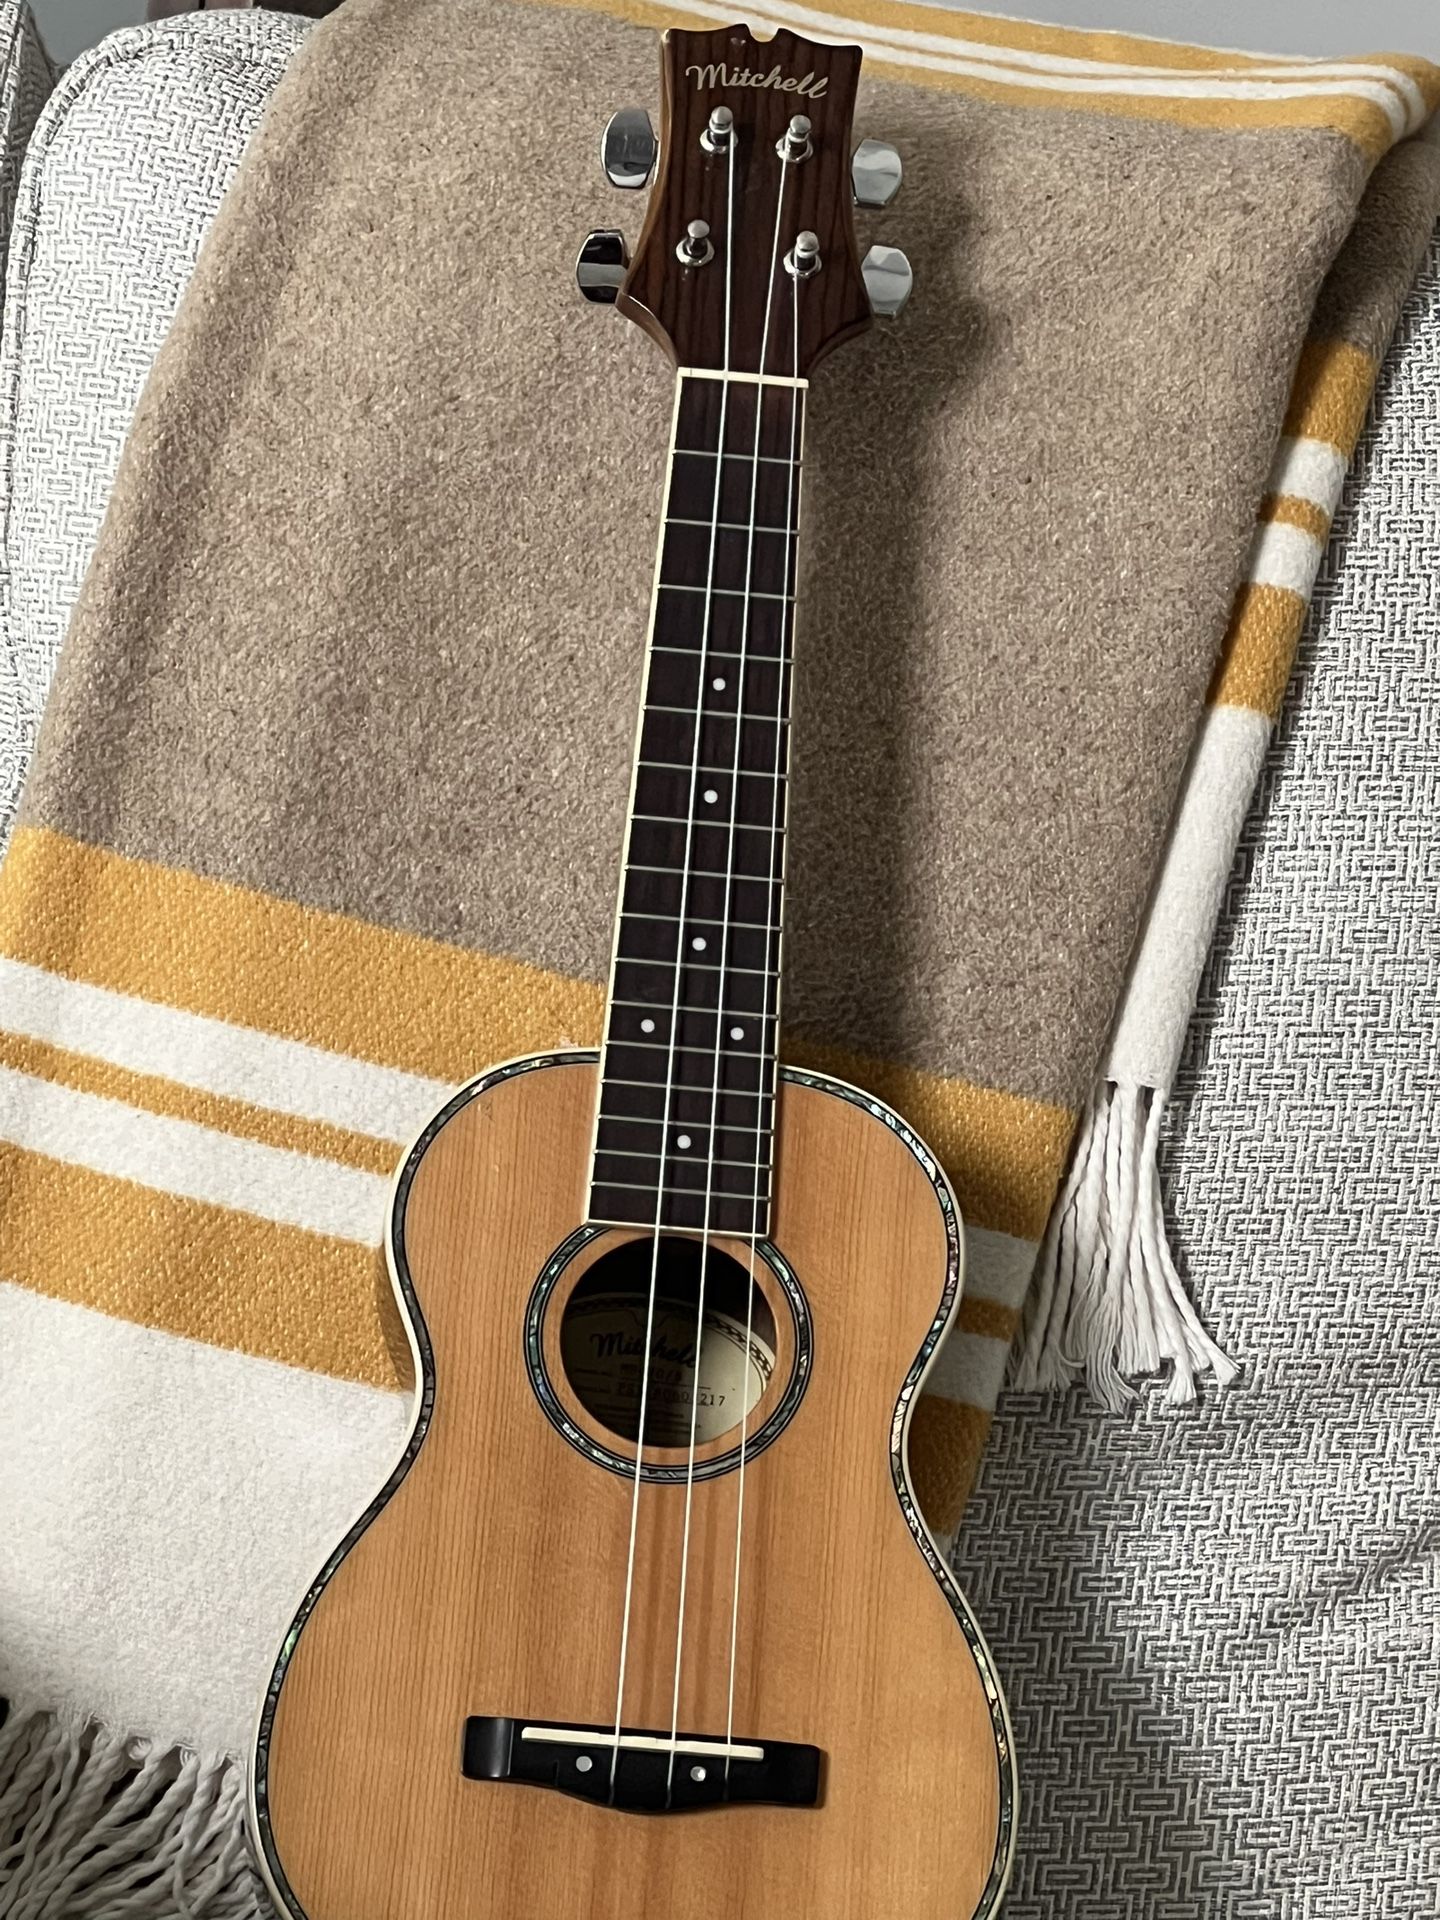 Mitchell Ukulele for Sale TN OfferUp